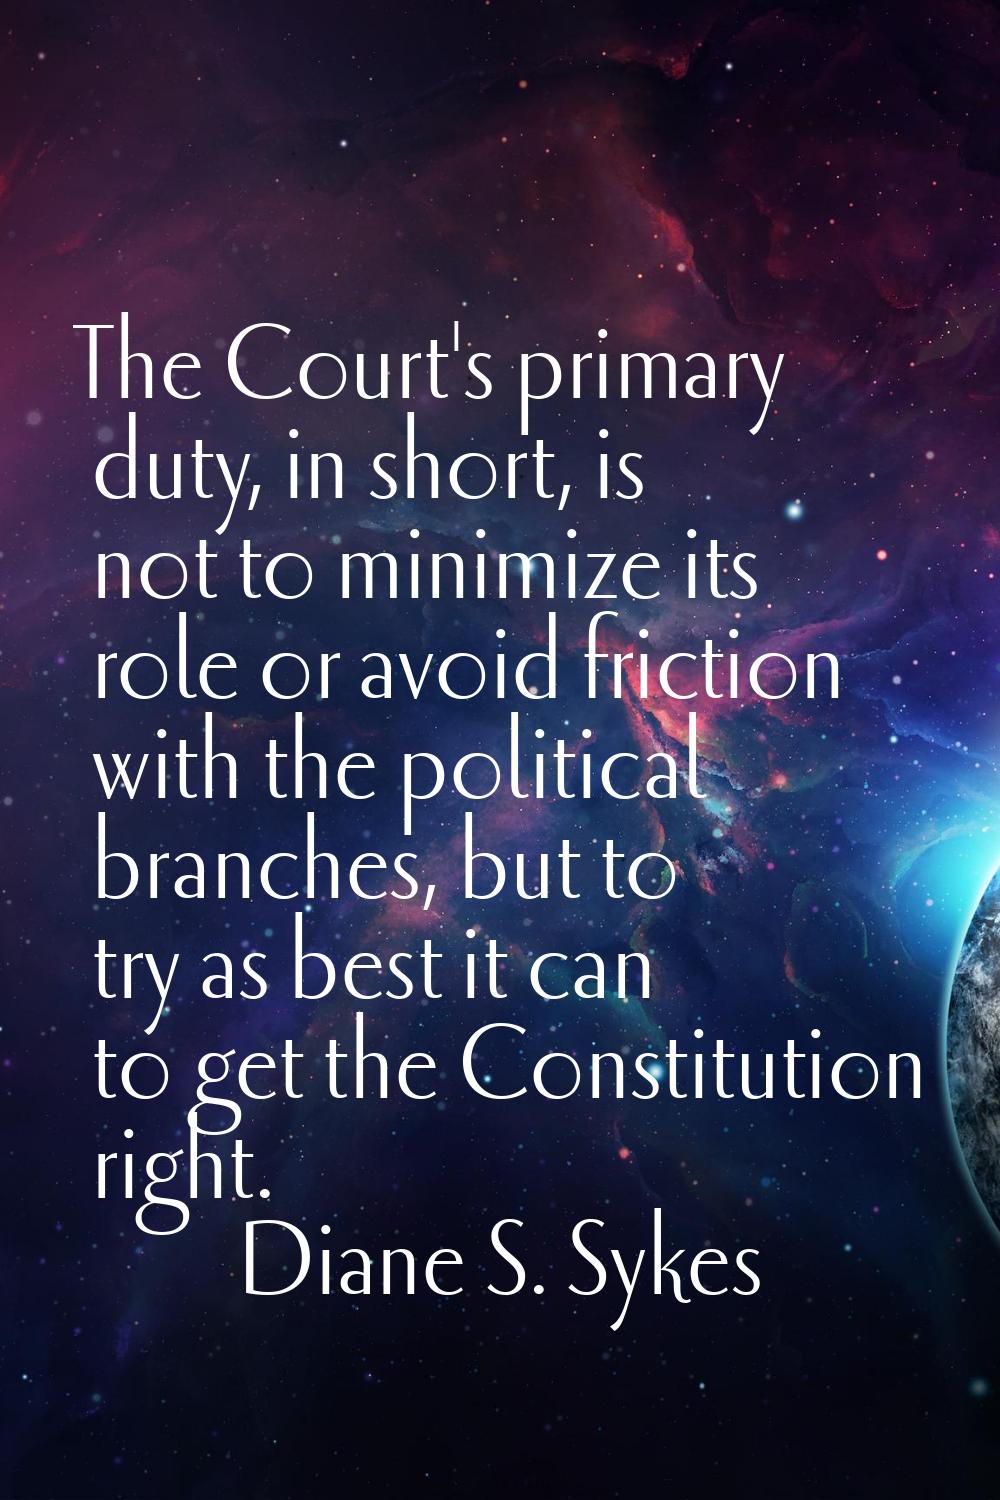 The Court's primary duty, in short, is not to minimize its role or avoid friction with the politica